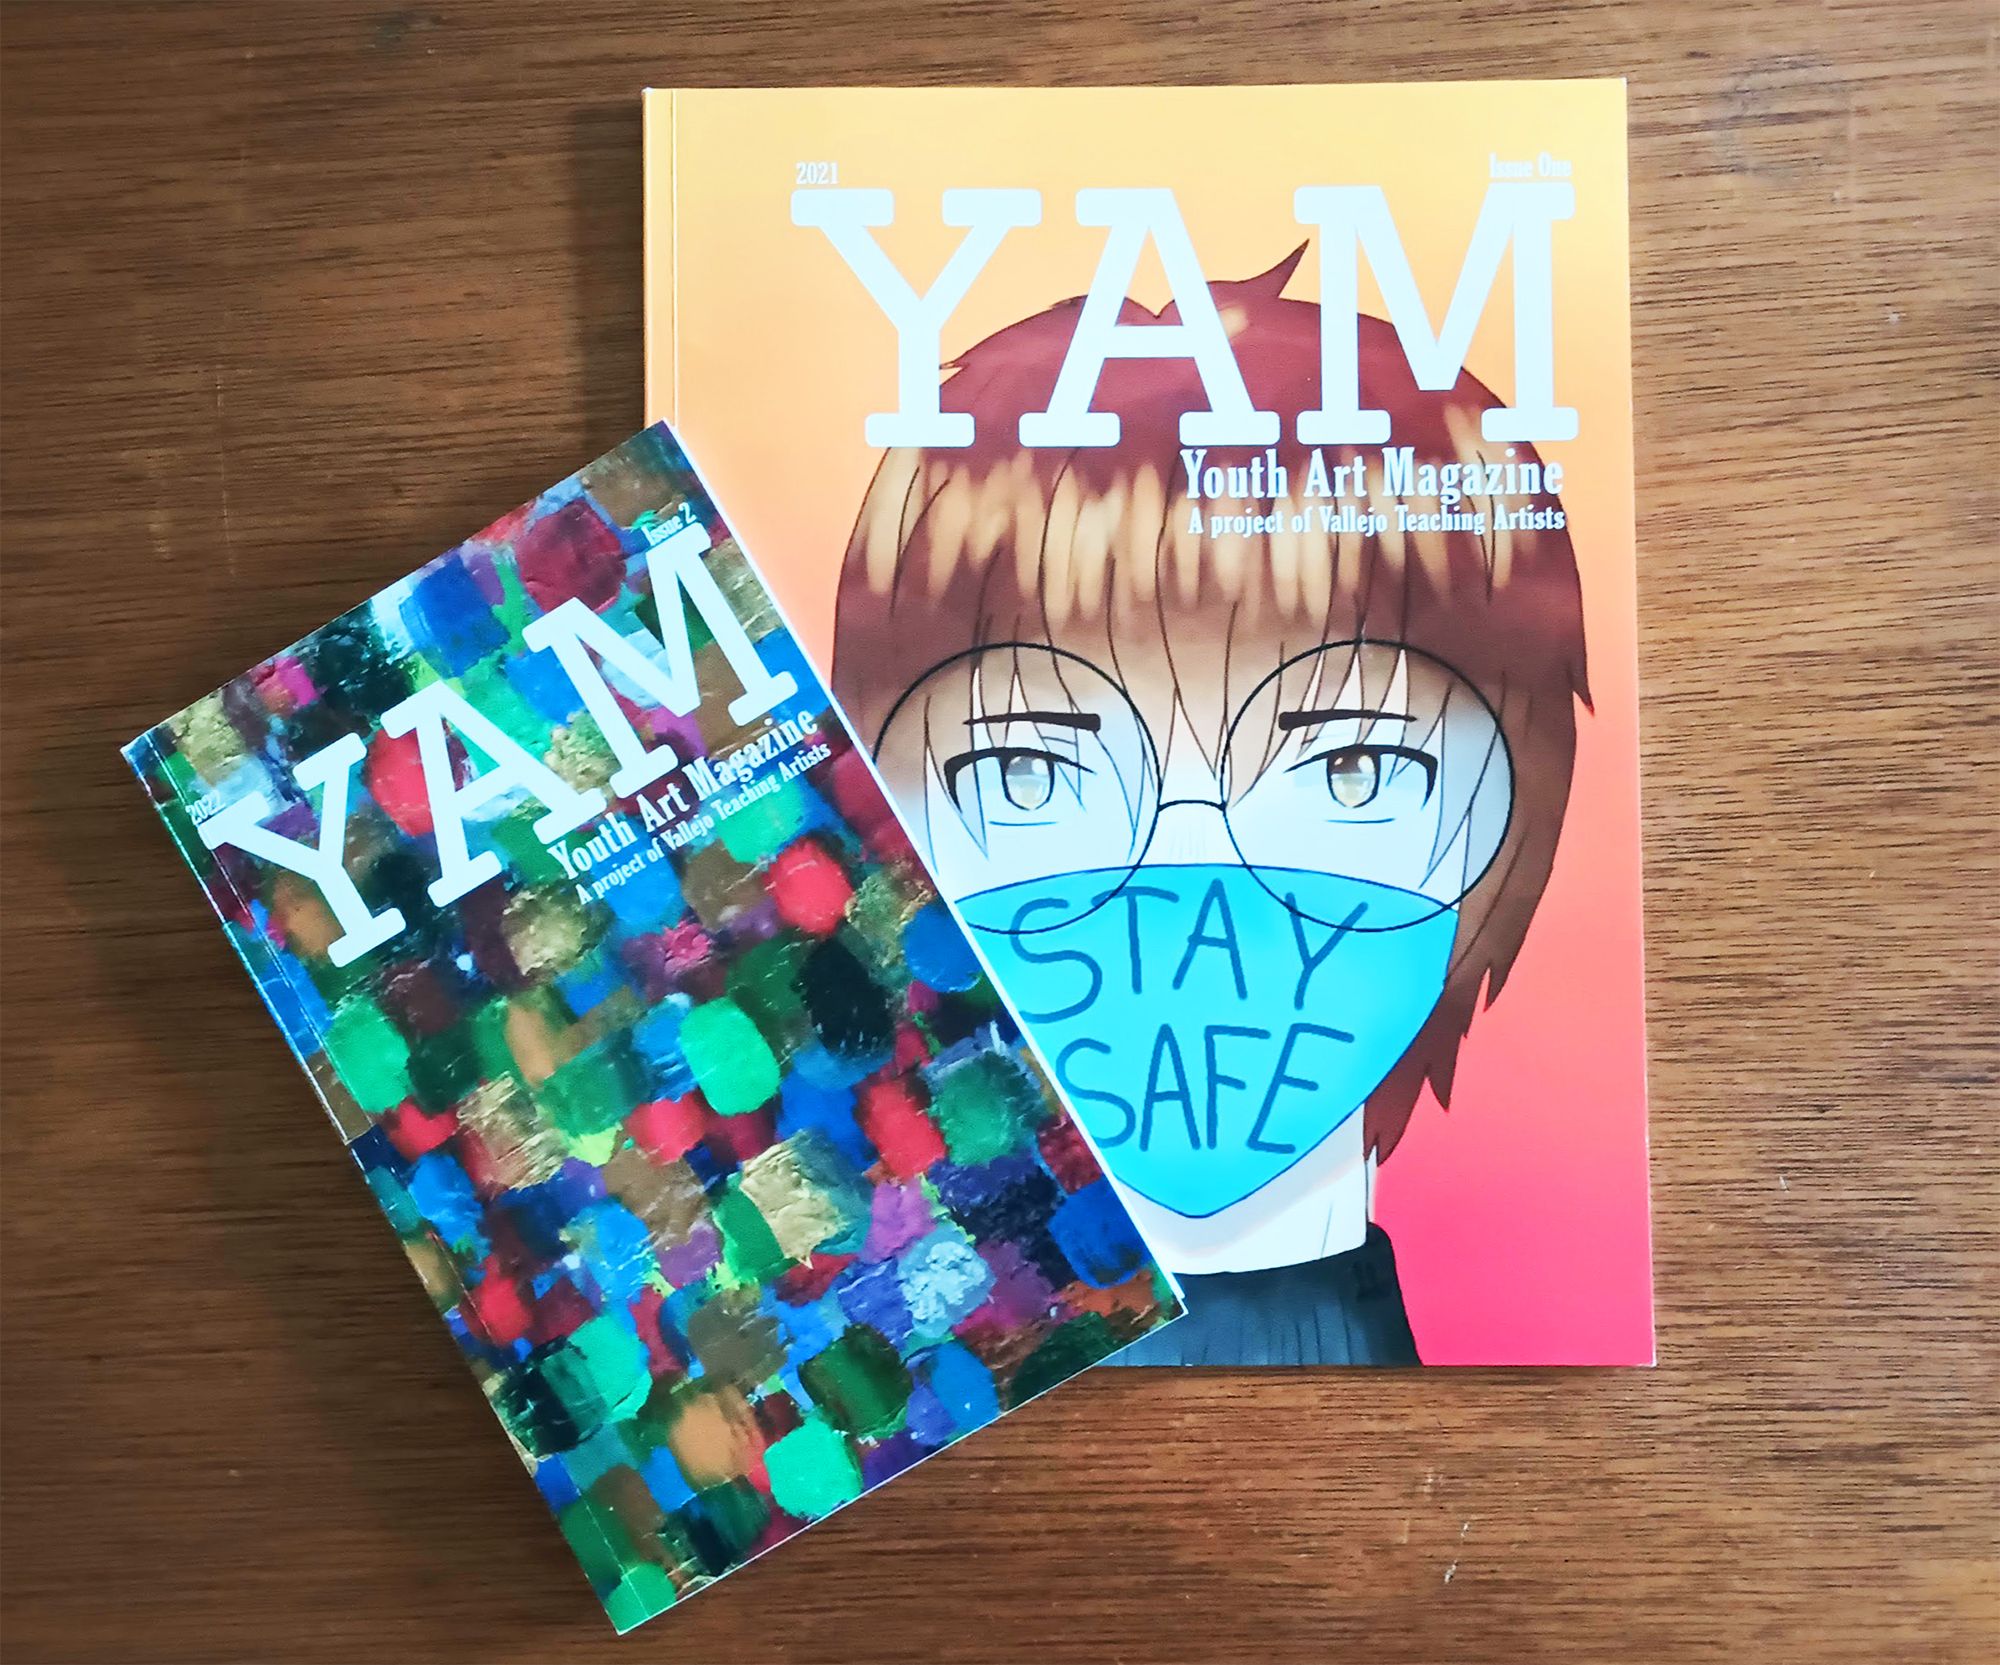 Youth Arts Magazine issues one and two.Youth Arts Magazine issues one and two. 